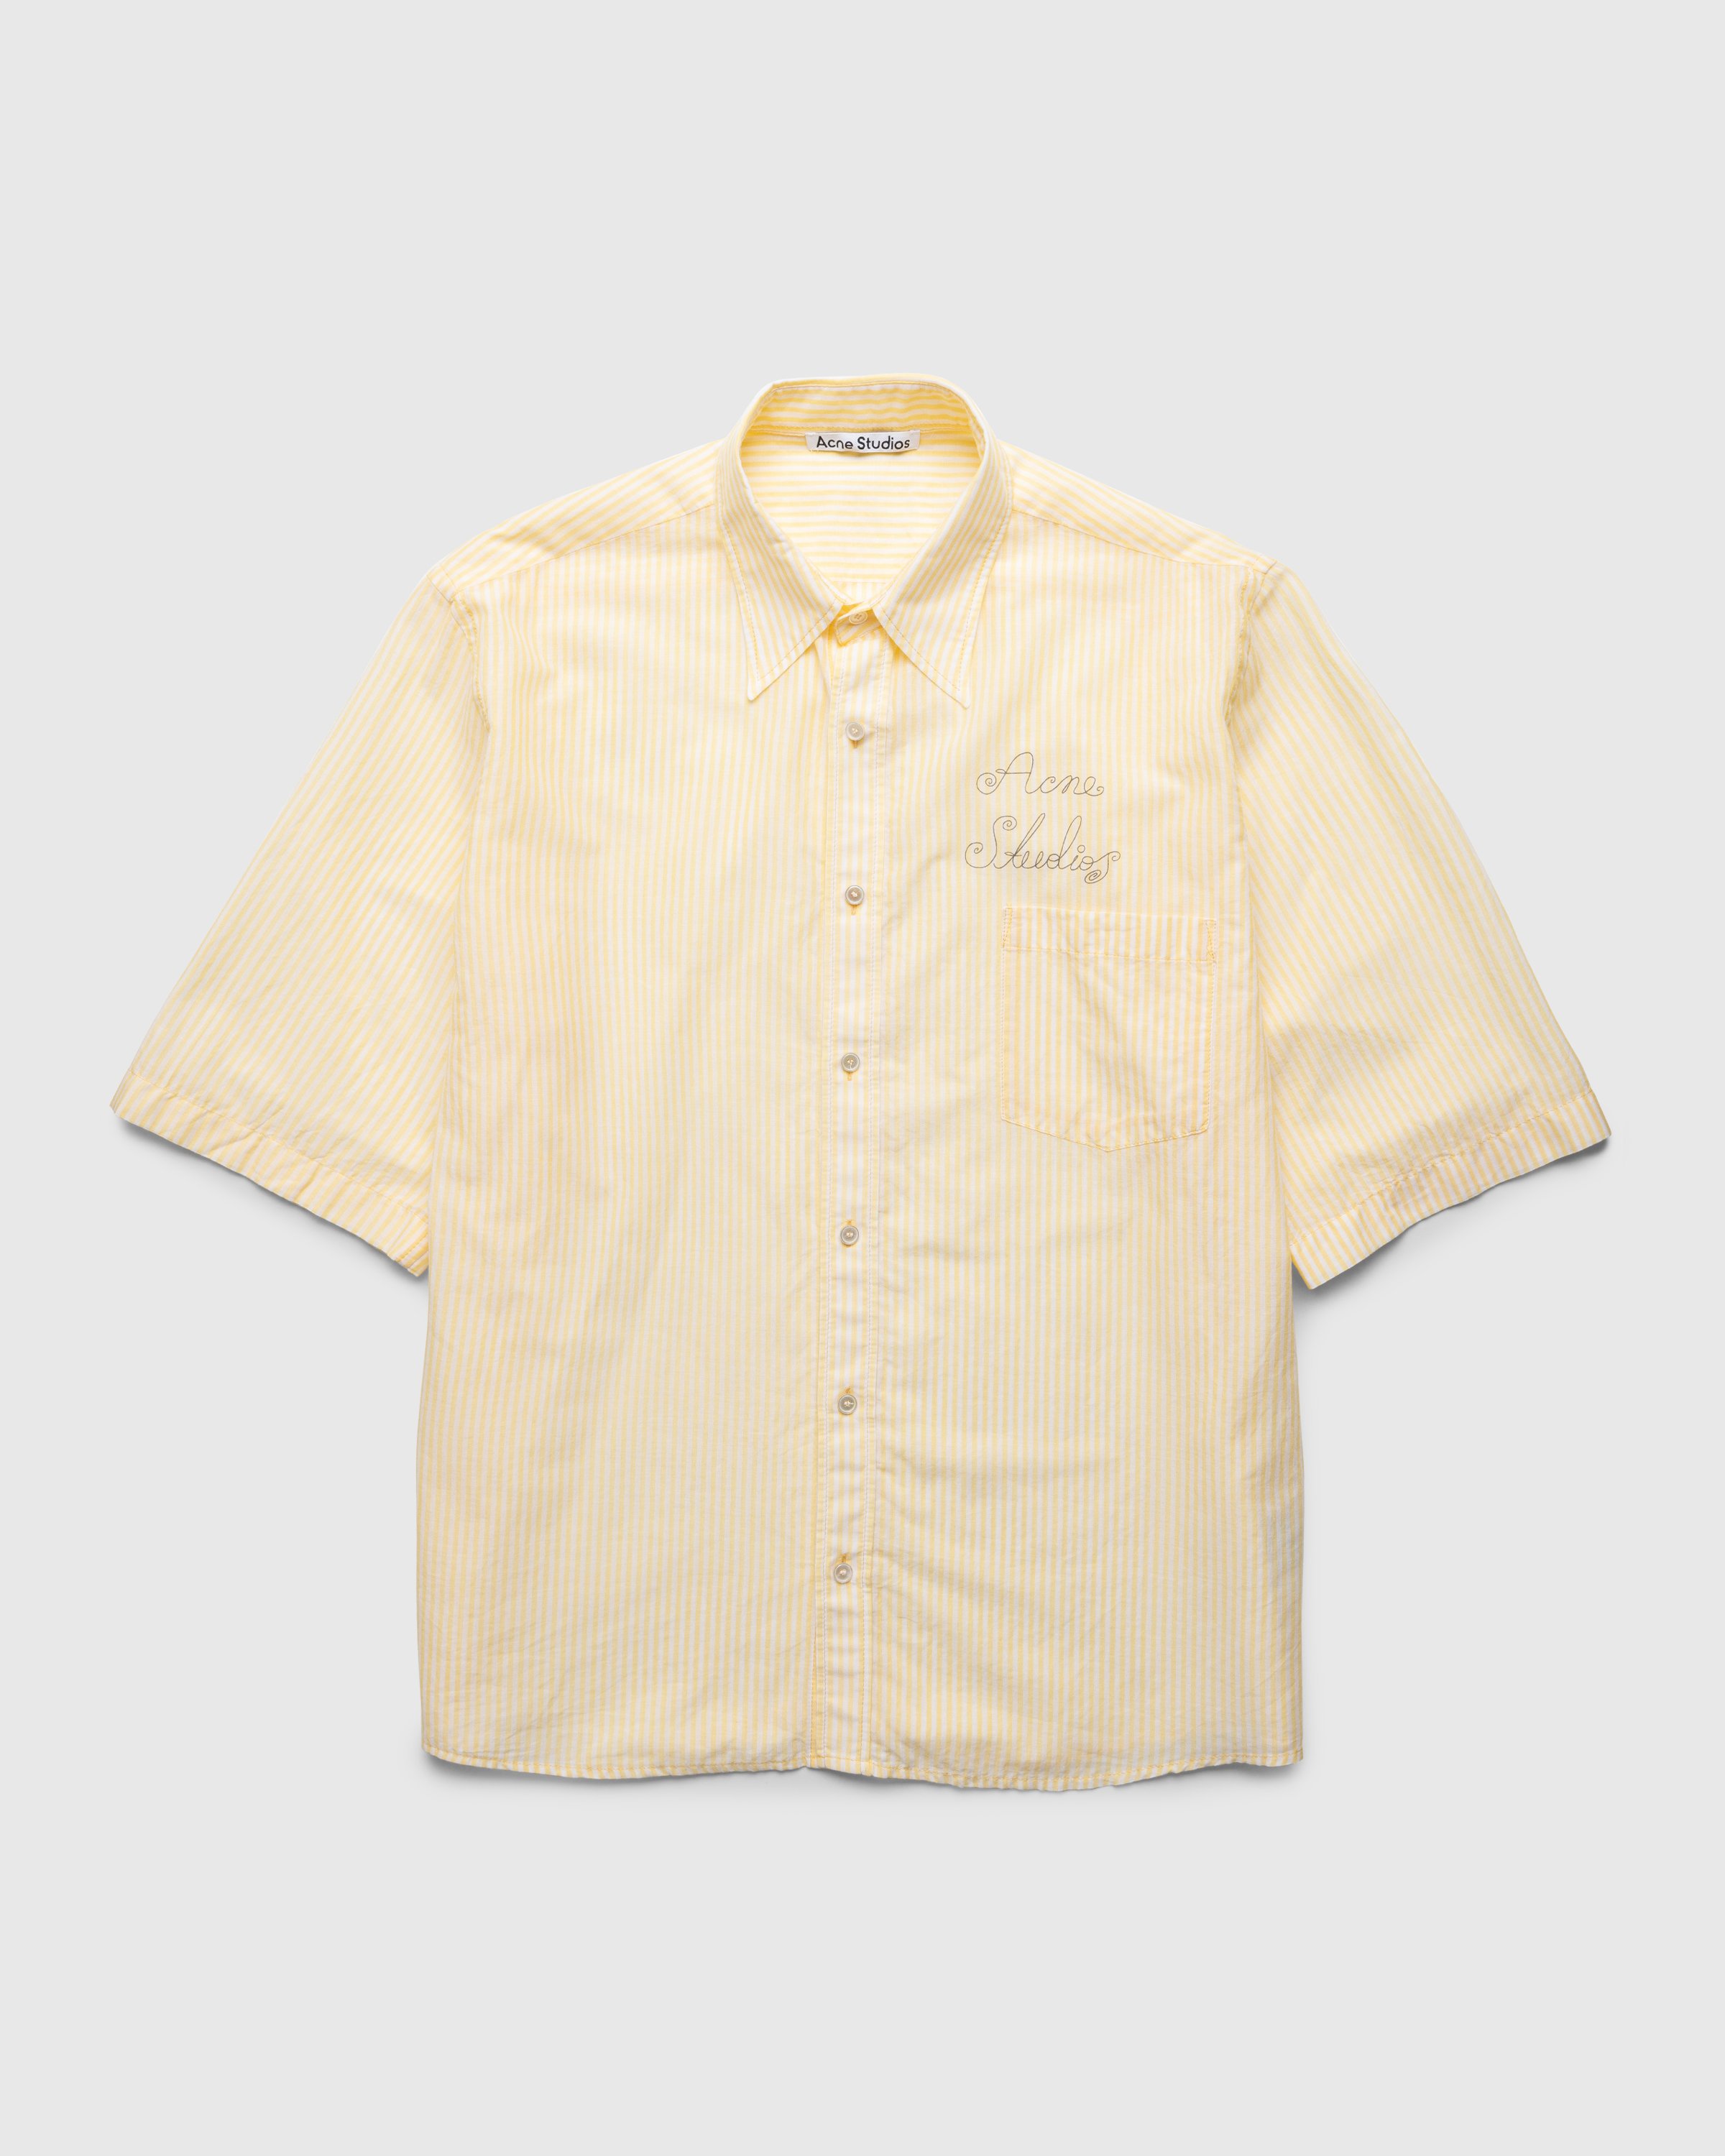 Acne Studios - Short Sleeve Button-Up Shirt Yellow - Clothing - Yellow - Image 1